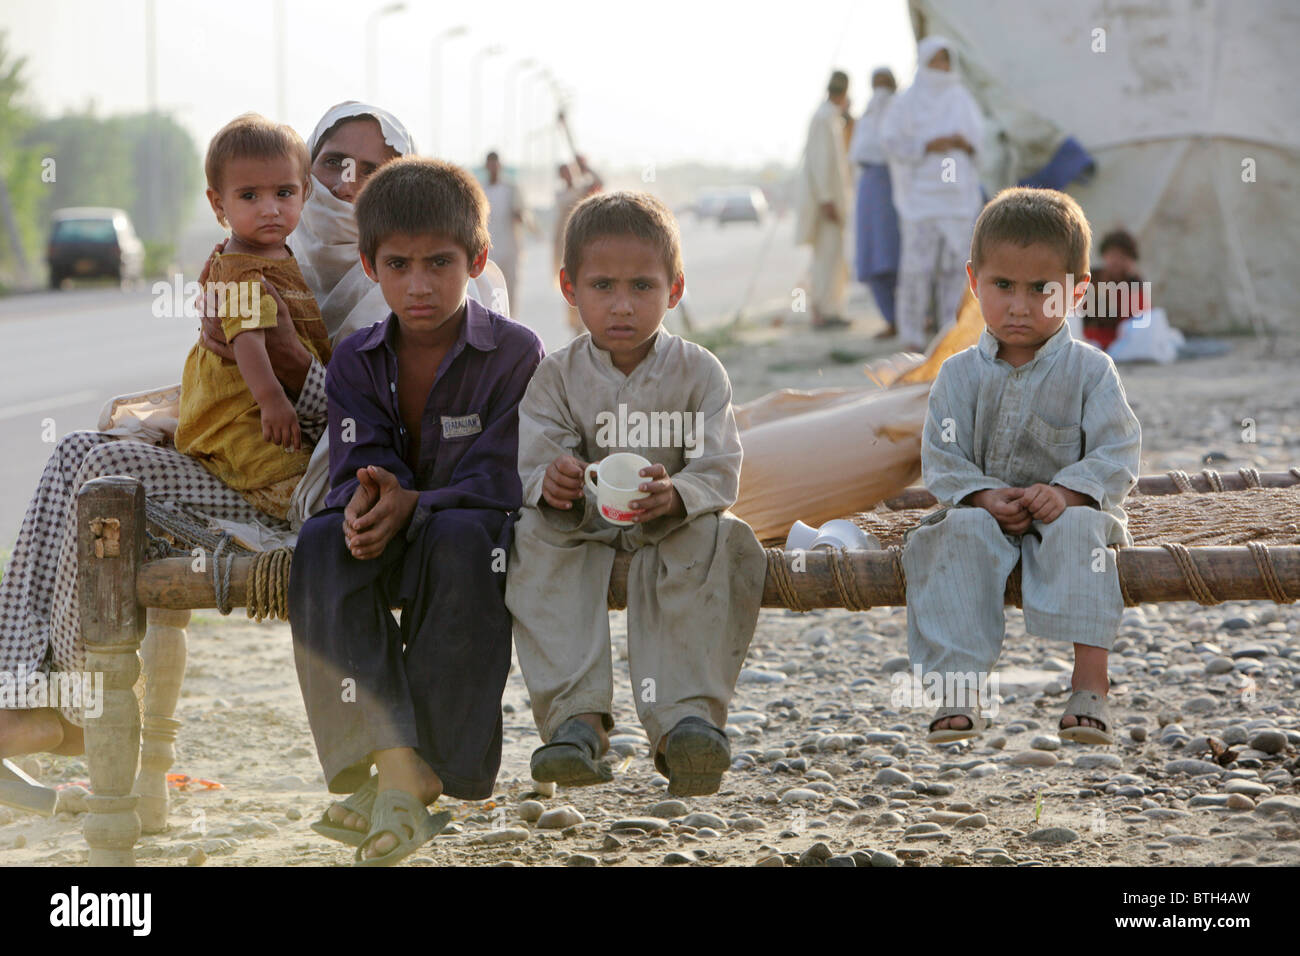 Flood refugees finding shelter in tents, Nowshera, Pakistan Stock Photo